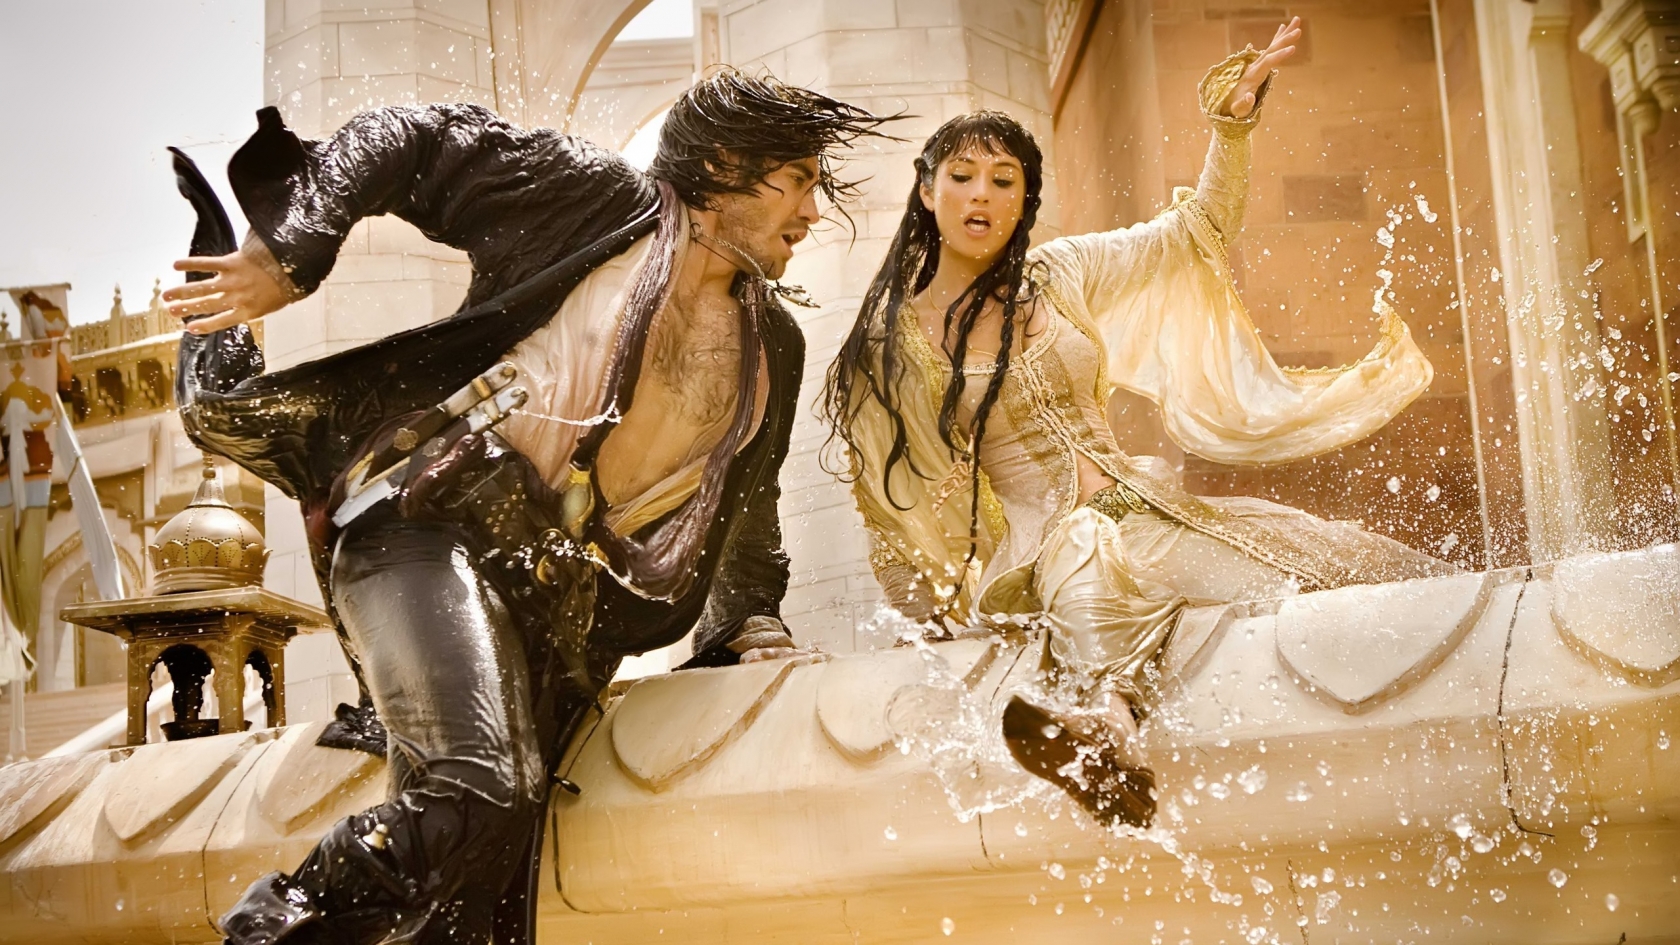 Prince Of Persia: The Sands of Time Movie for 1680 x 945 HDTV resolution